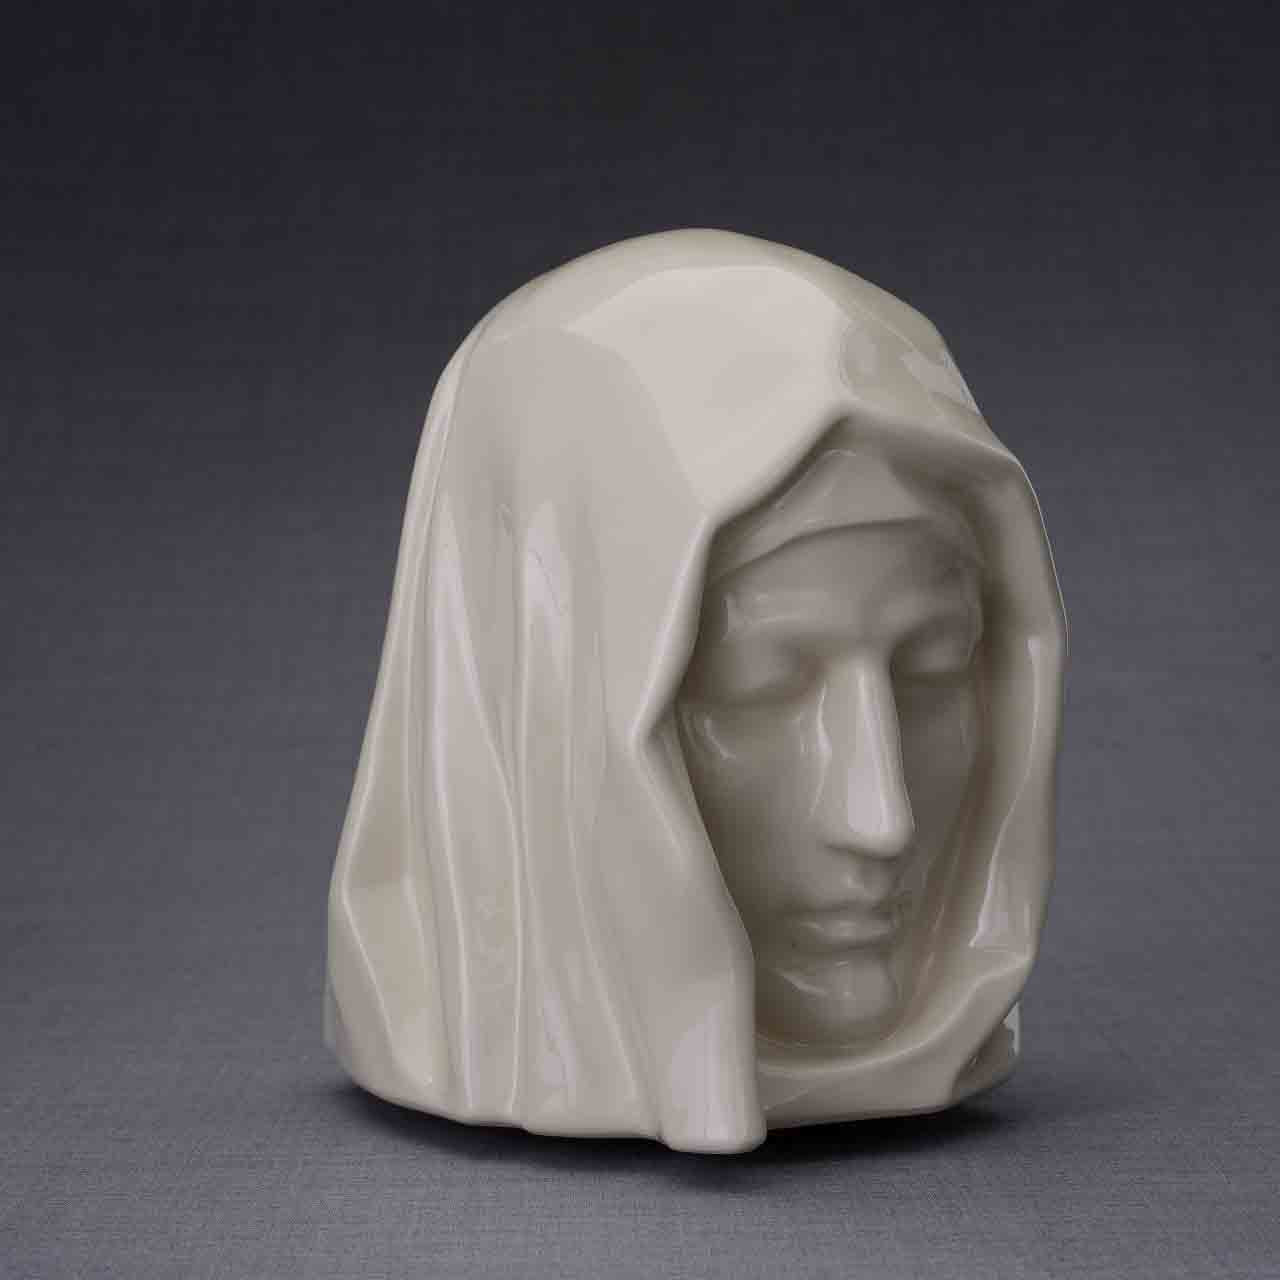 The Holy Mother Cremation Urn for Ashes in Cream Turned Right Dark Background